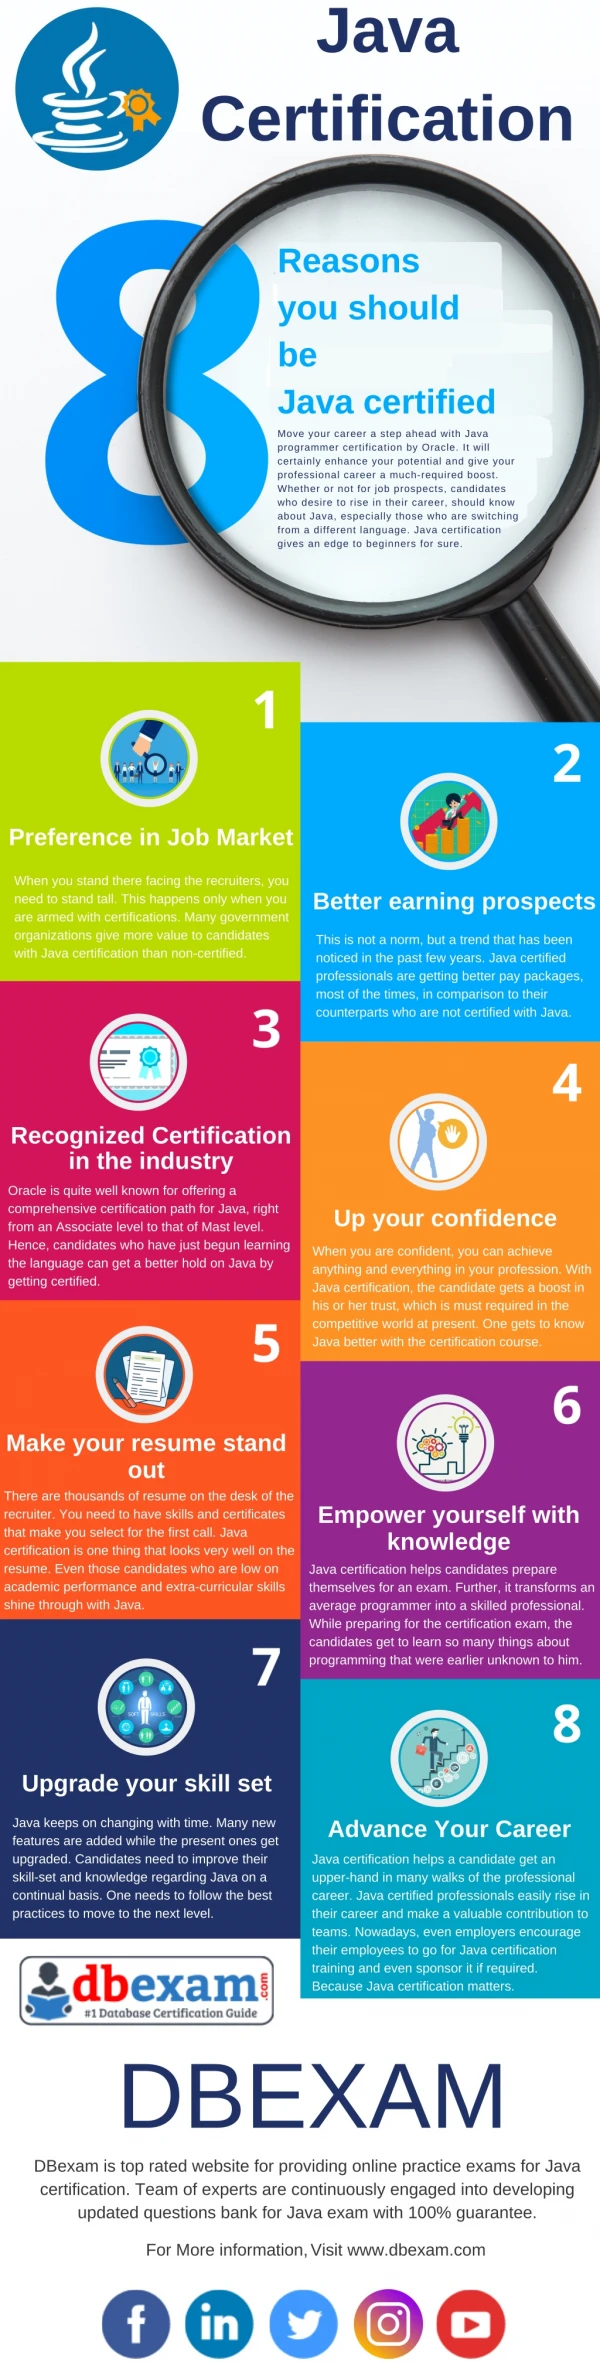 [Infographic] Best 8 Reasons You Should Be Java Certified